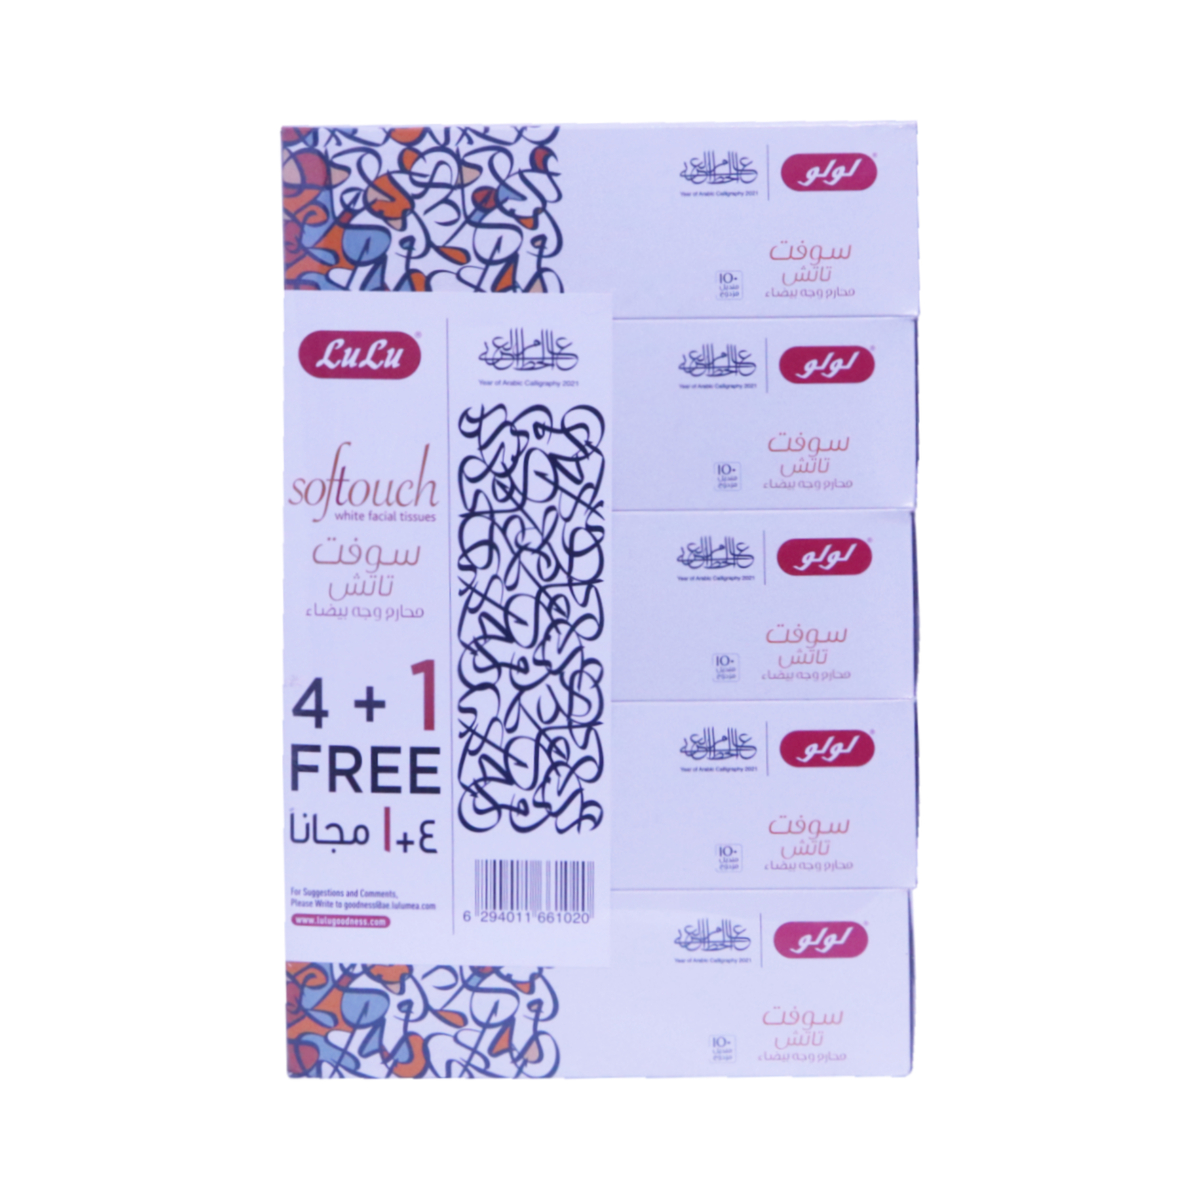 LuLu Softouch White Facial Tissues (Arabic Calligraphy Packaging) 2ply 150 Sheets